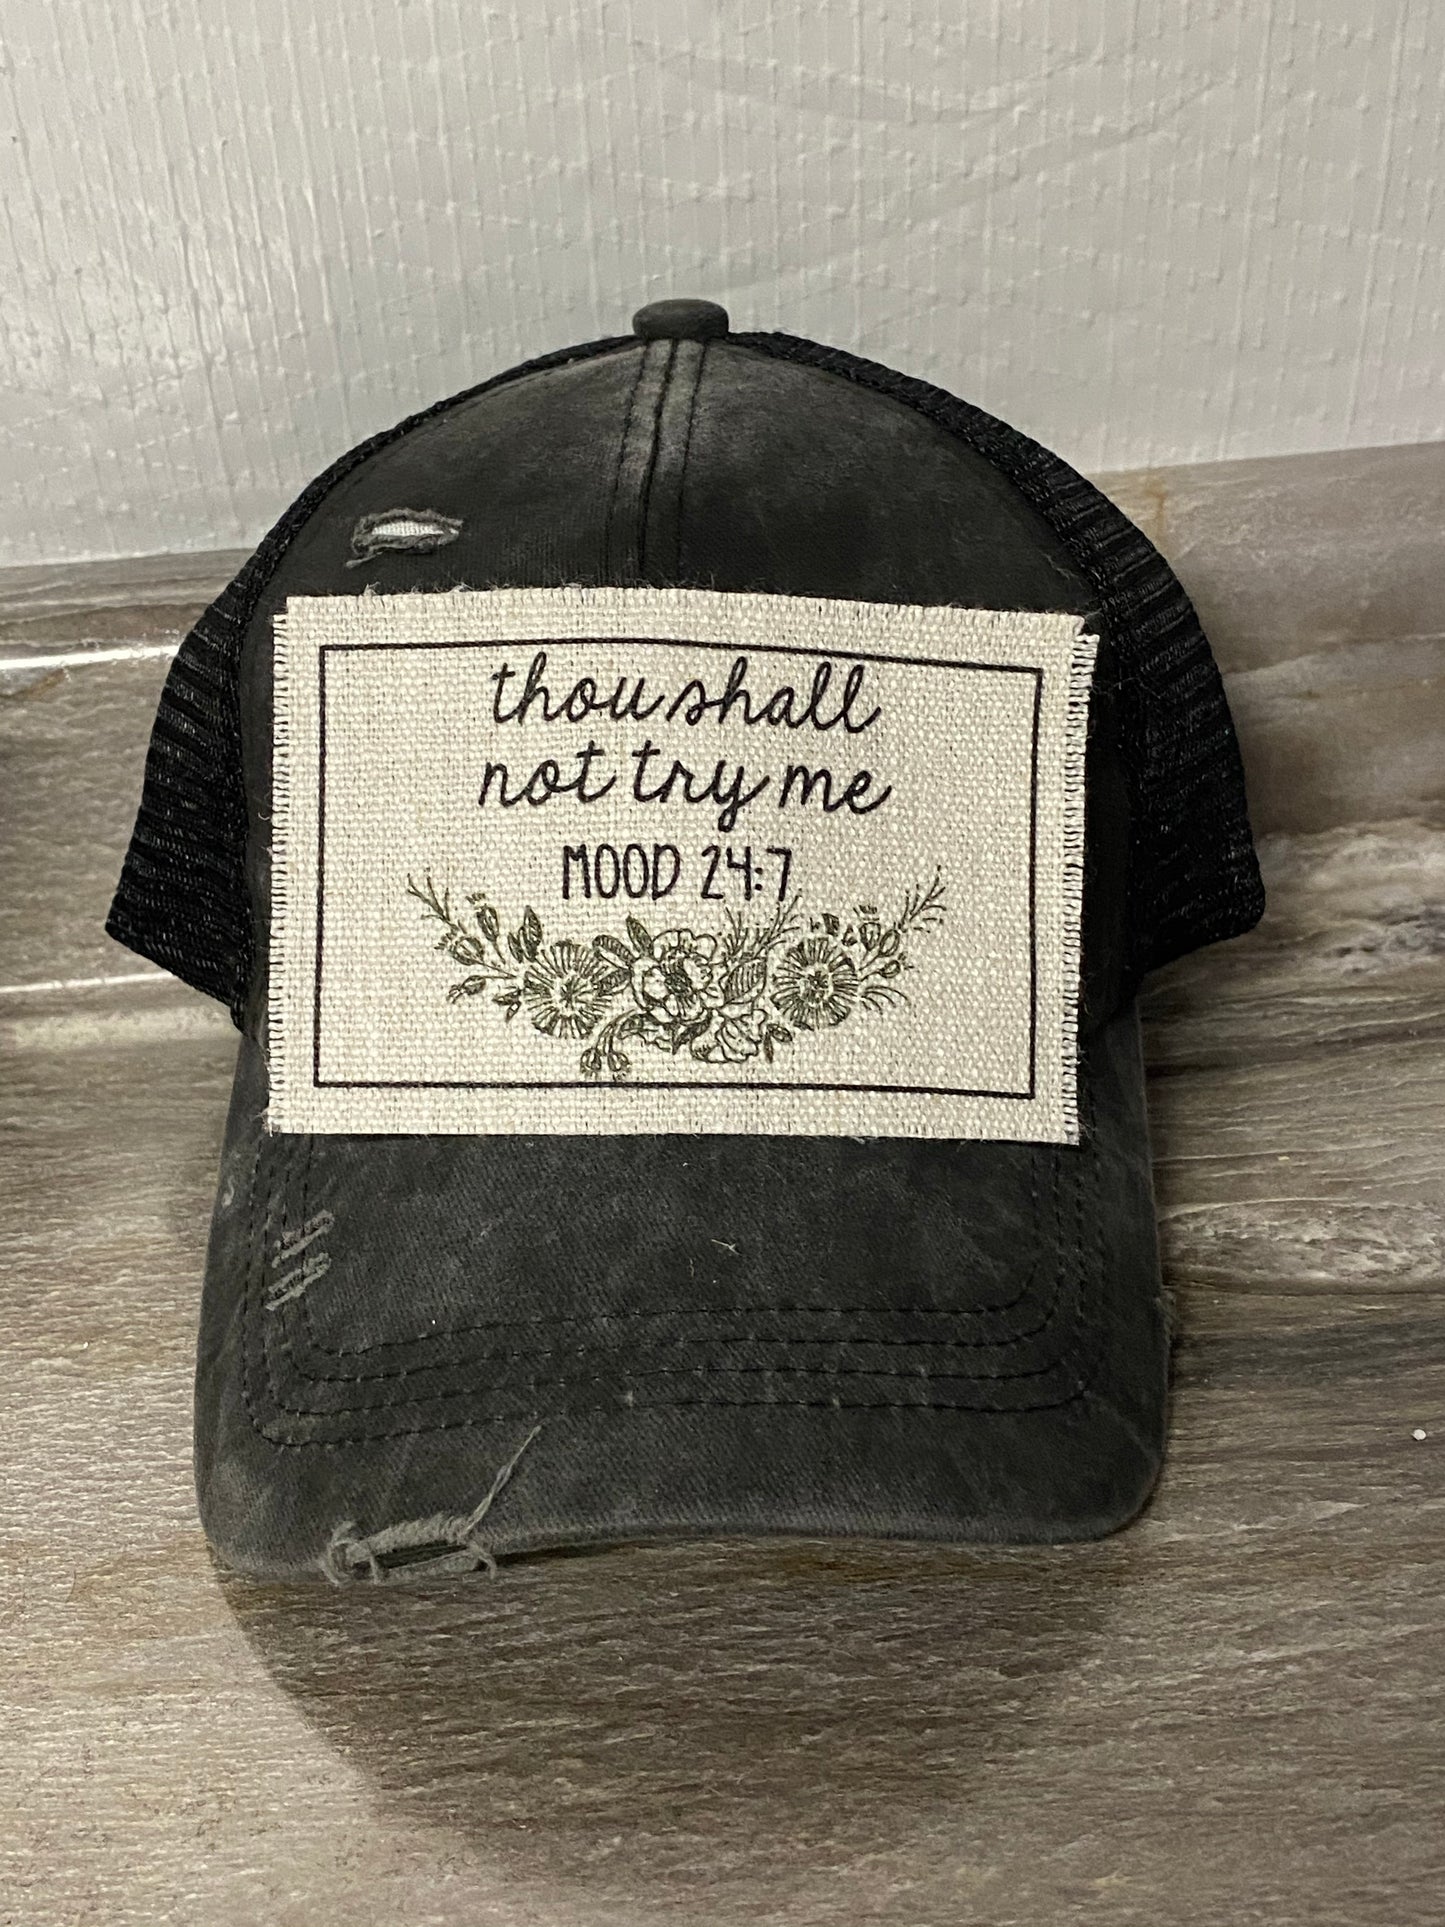 Thou Shall Not Try Me Mood 24:7 Hat Patch